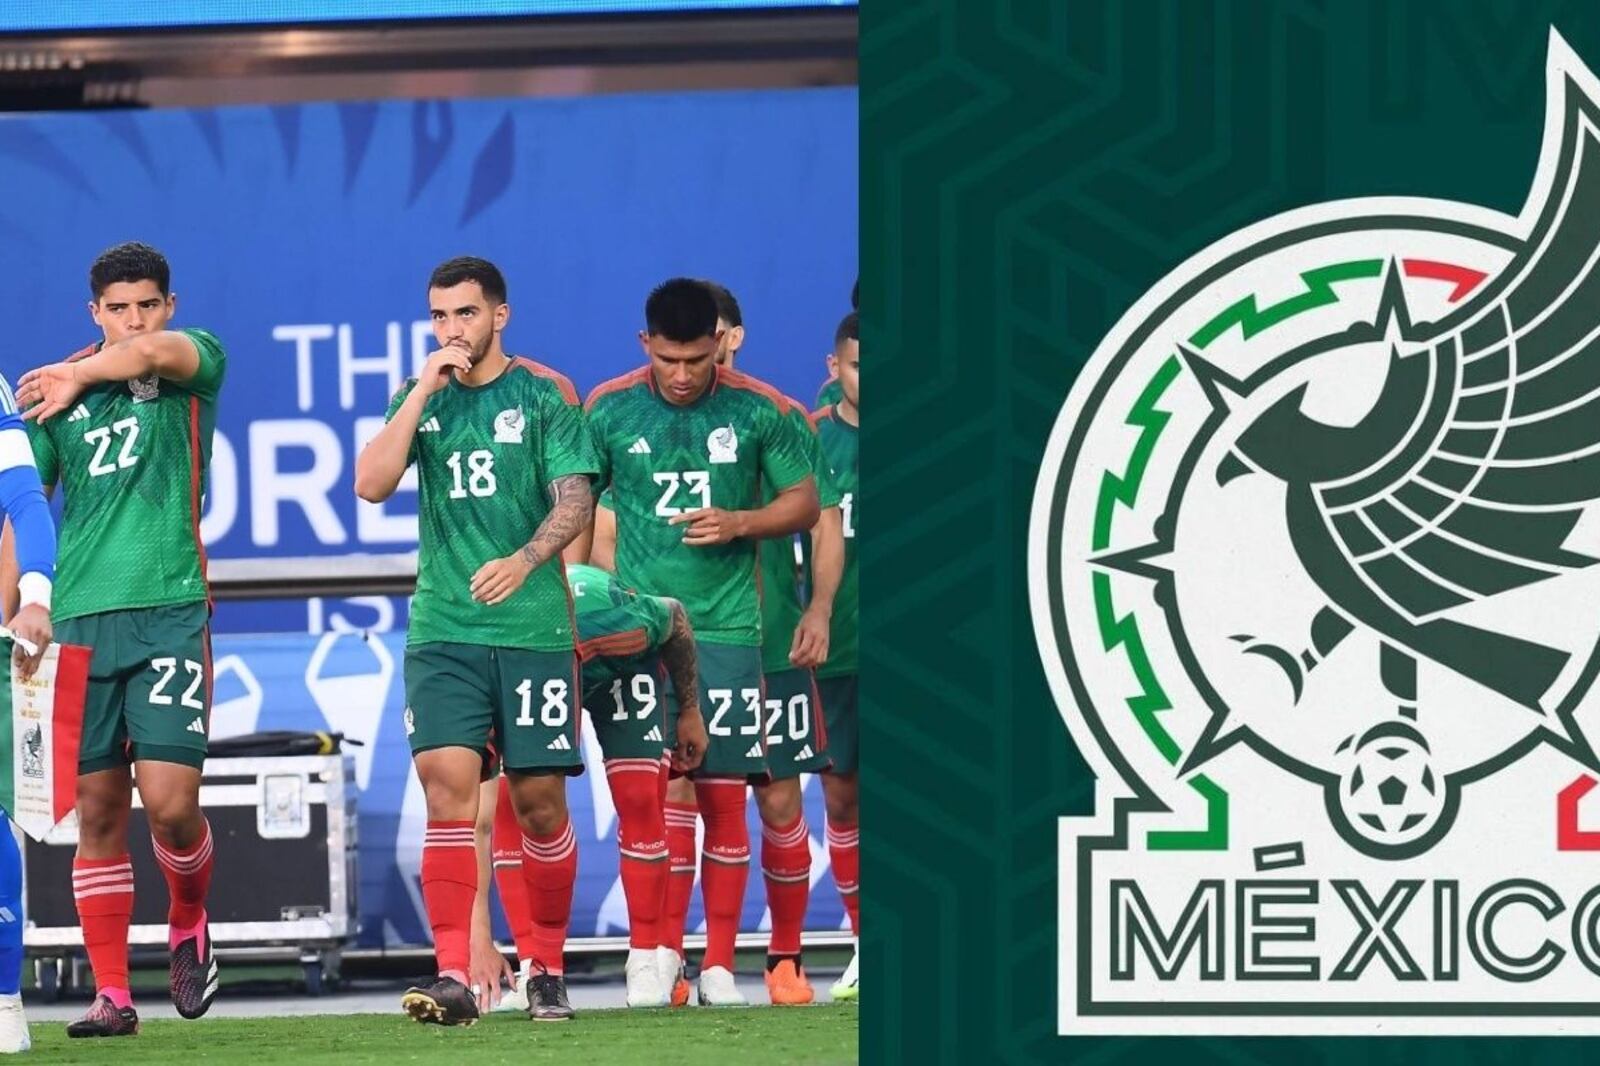 Goodbye Tri, the two players who want to leave the Mexican National Team